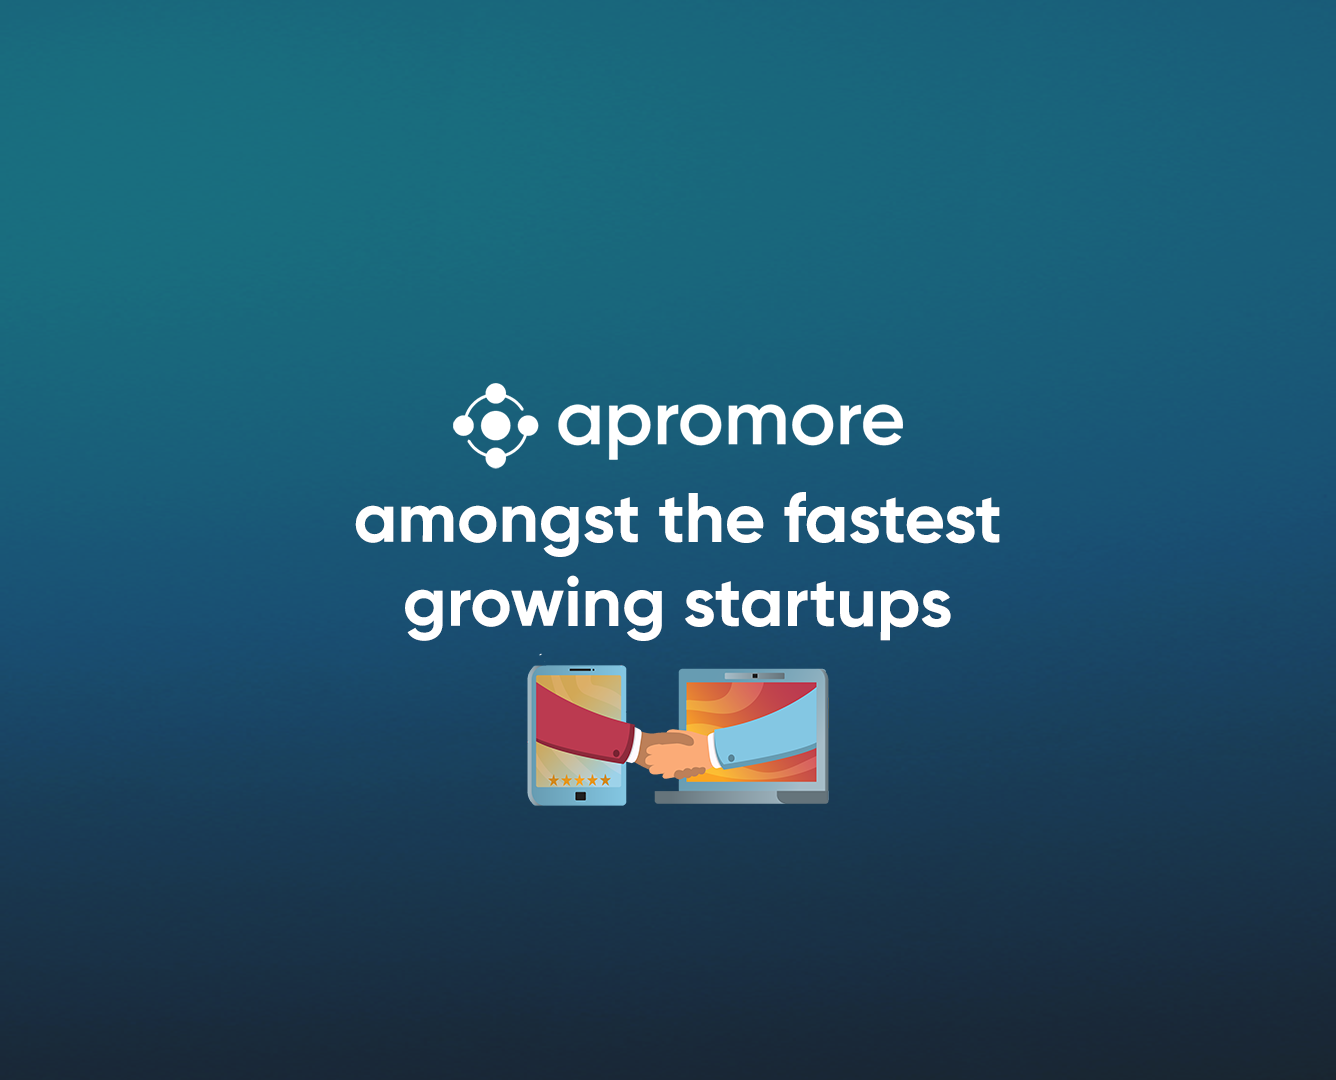 Apromore as One of the Fastest Growing Startups in Australia